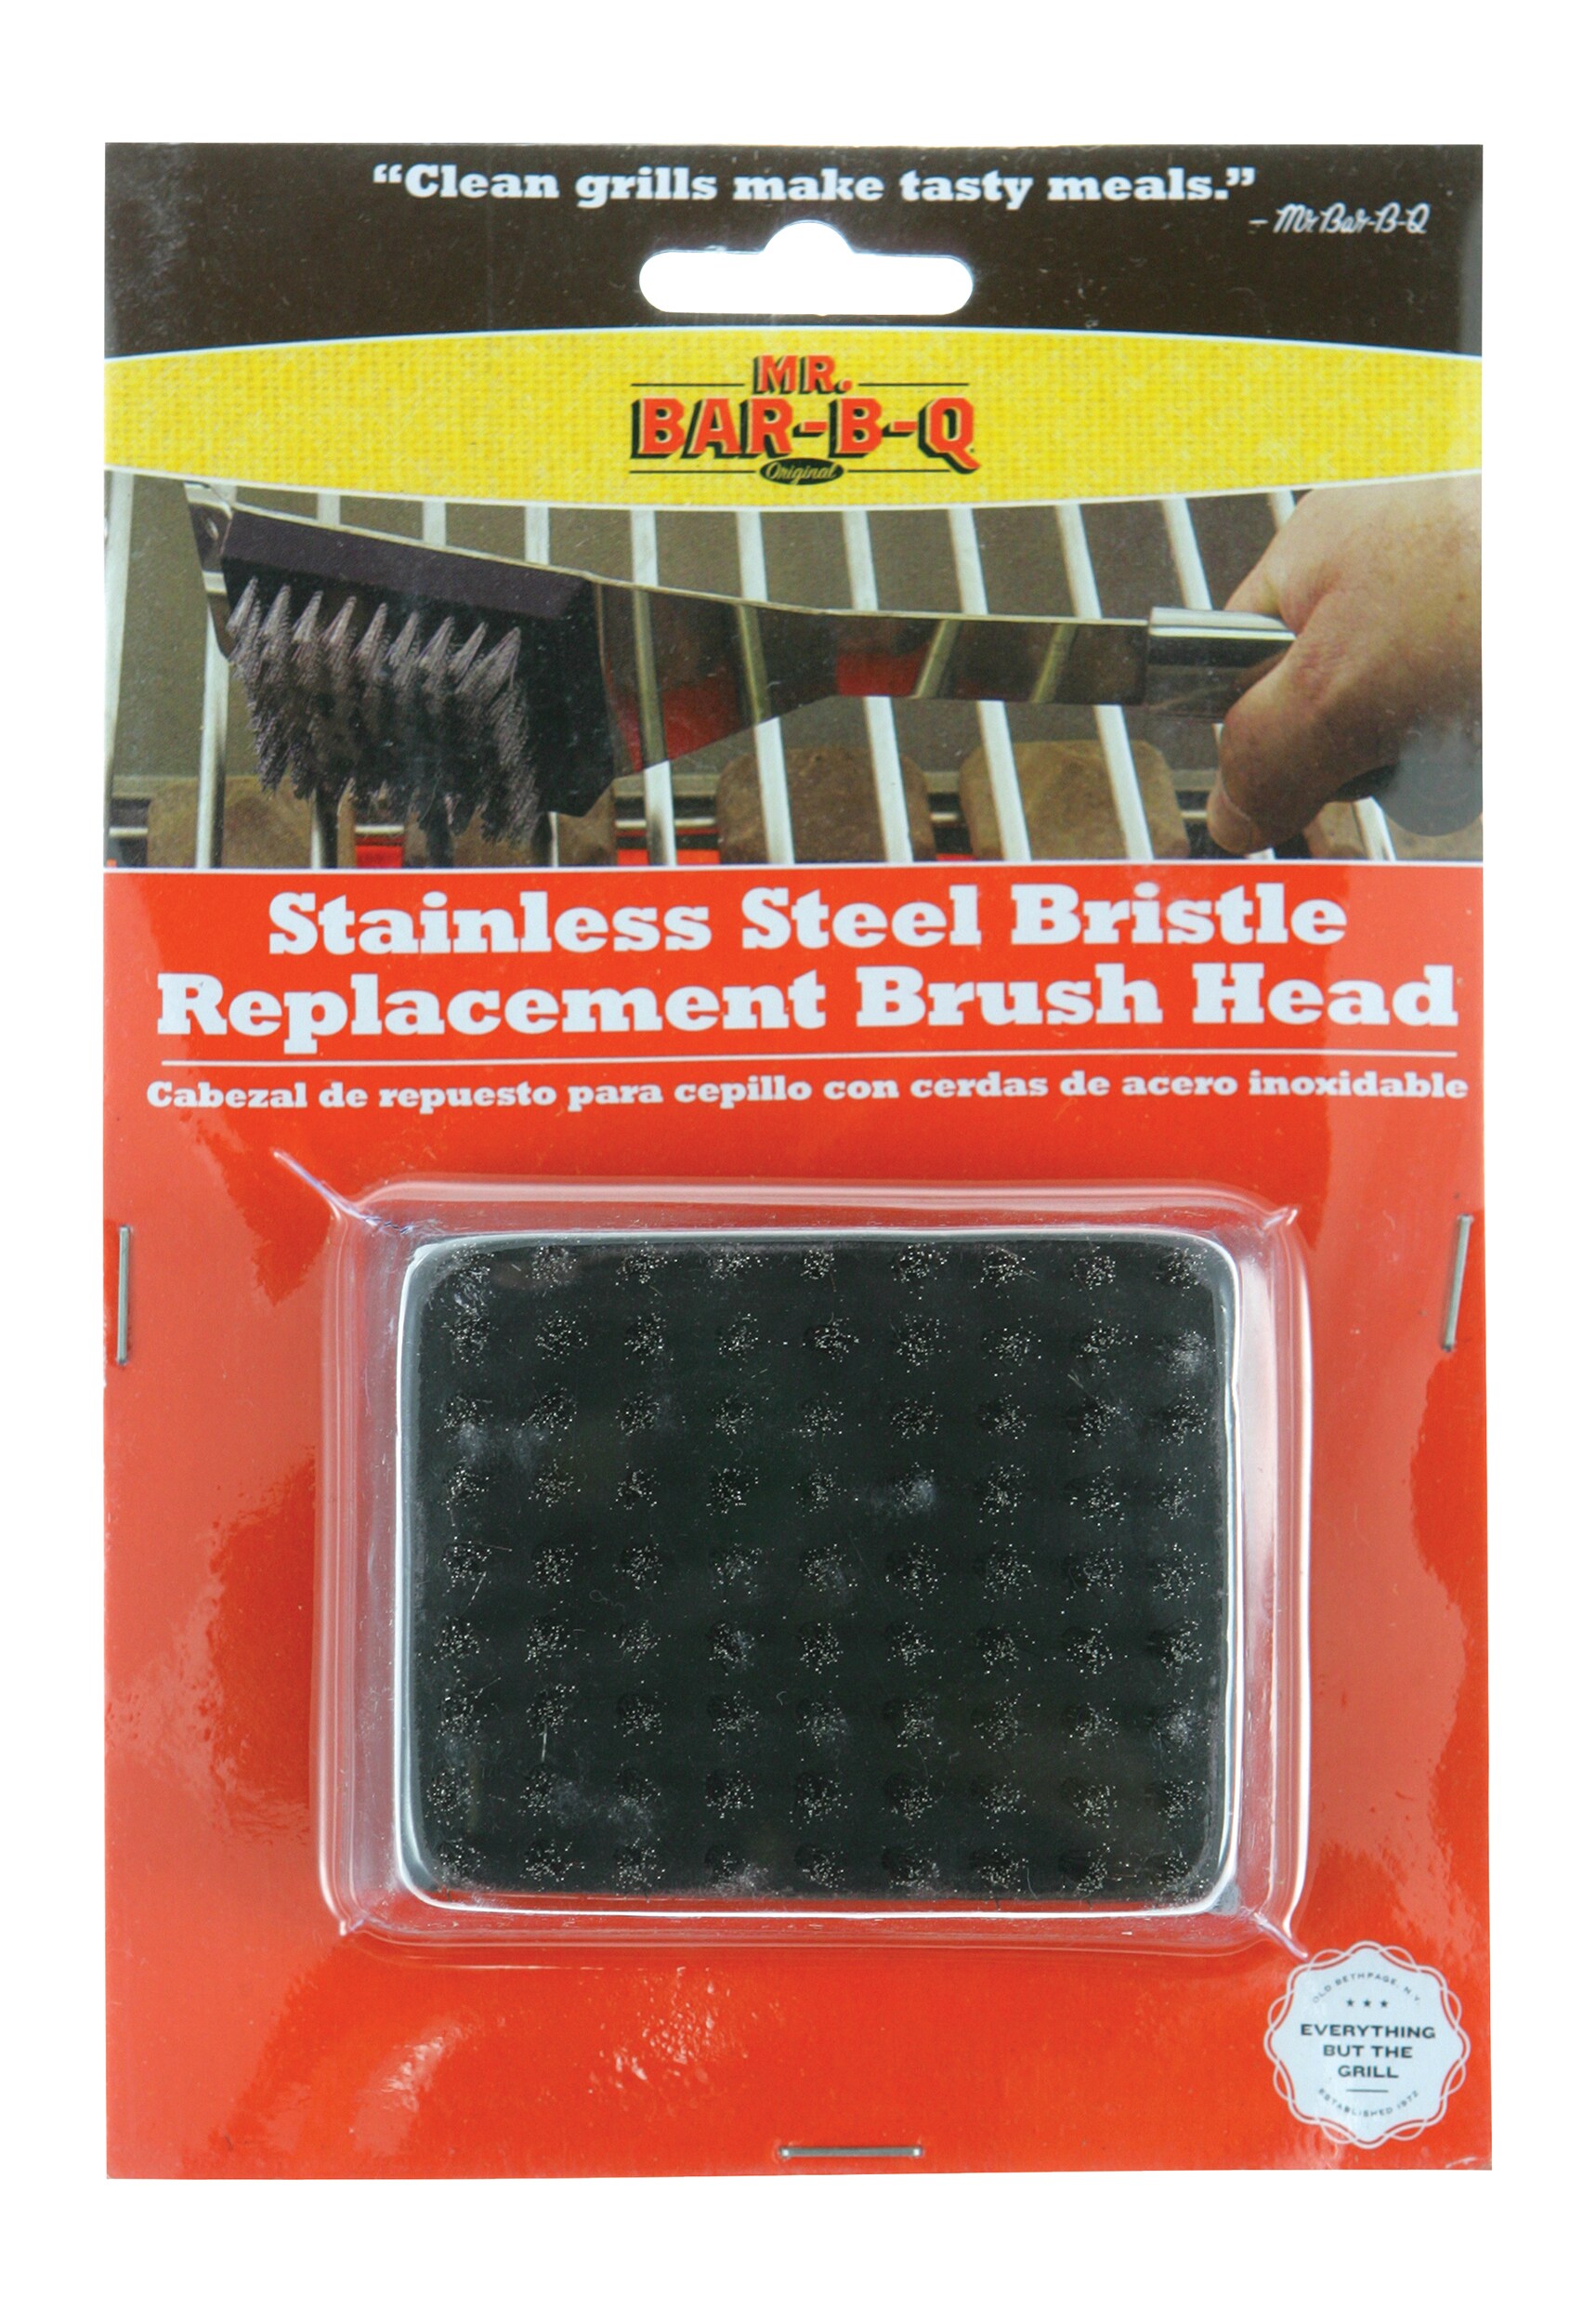 Coiled Grill Brush with Replaceable Head - Blanton-Caldwell